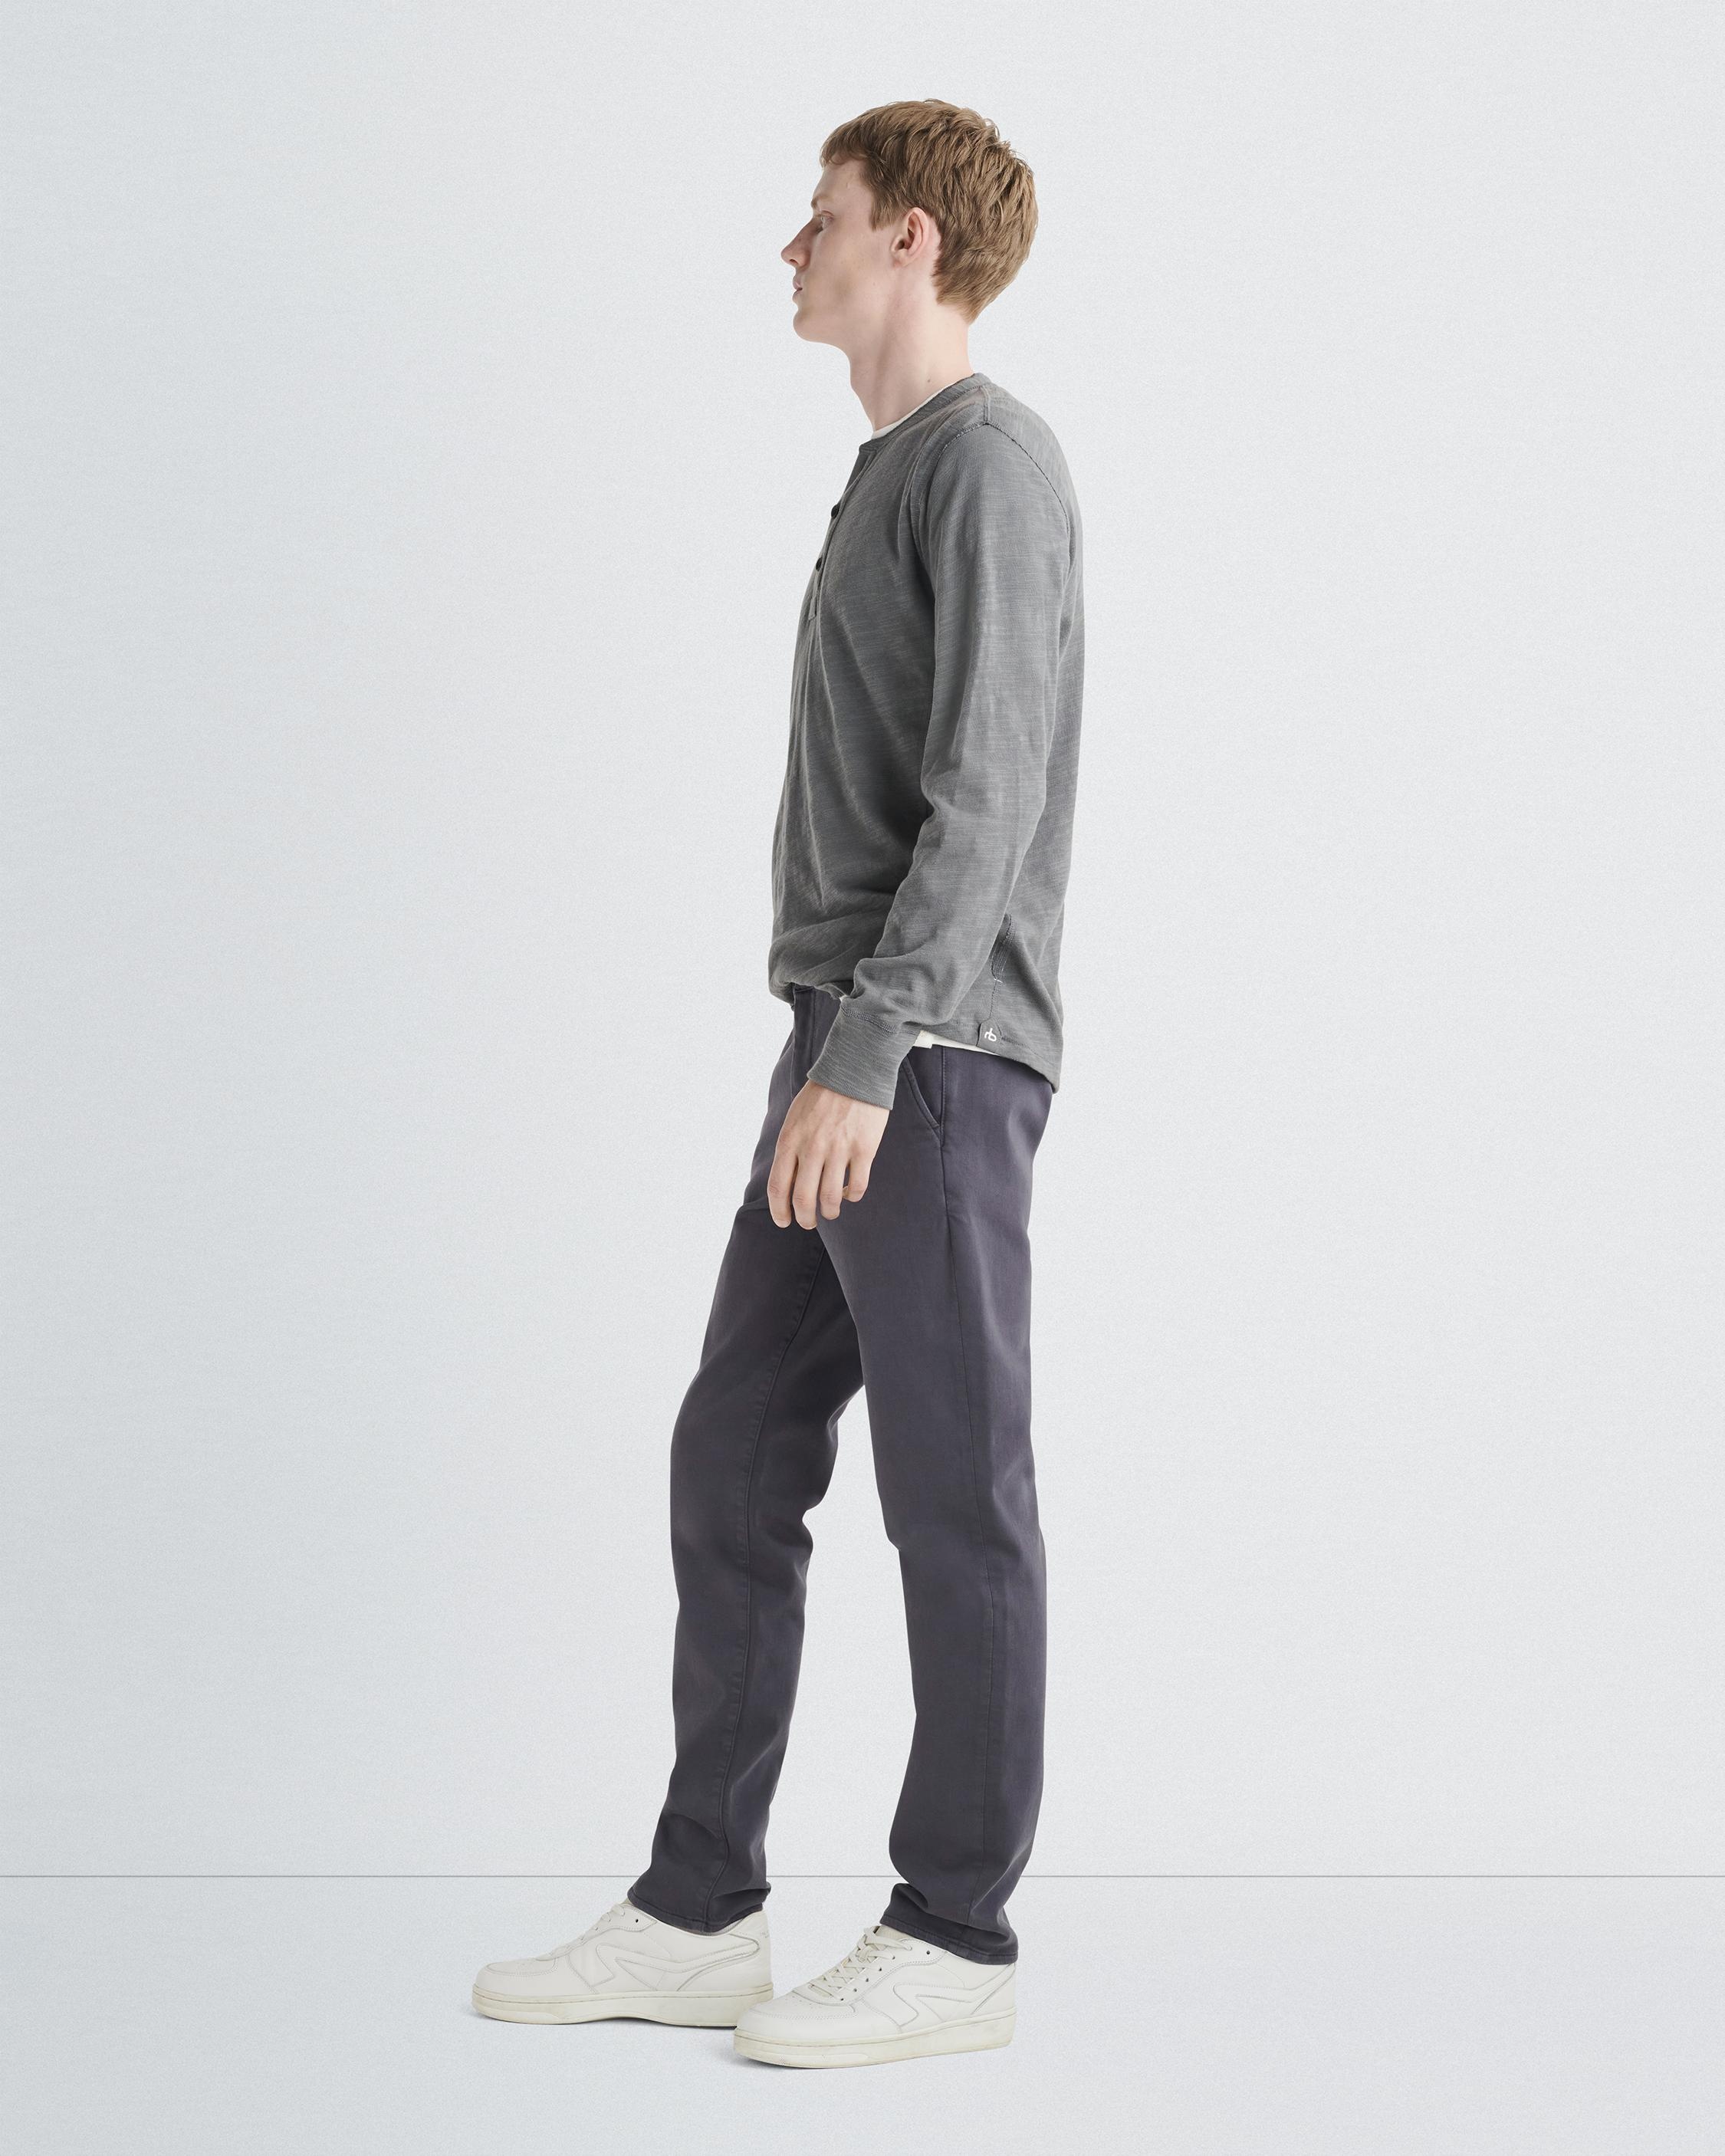 Fit 2 Action Loopback Chino
Slim Fit - 4